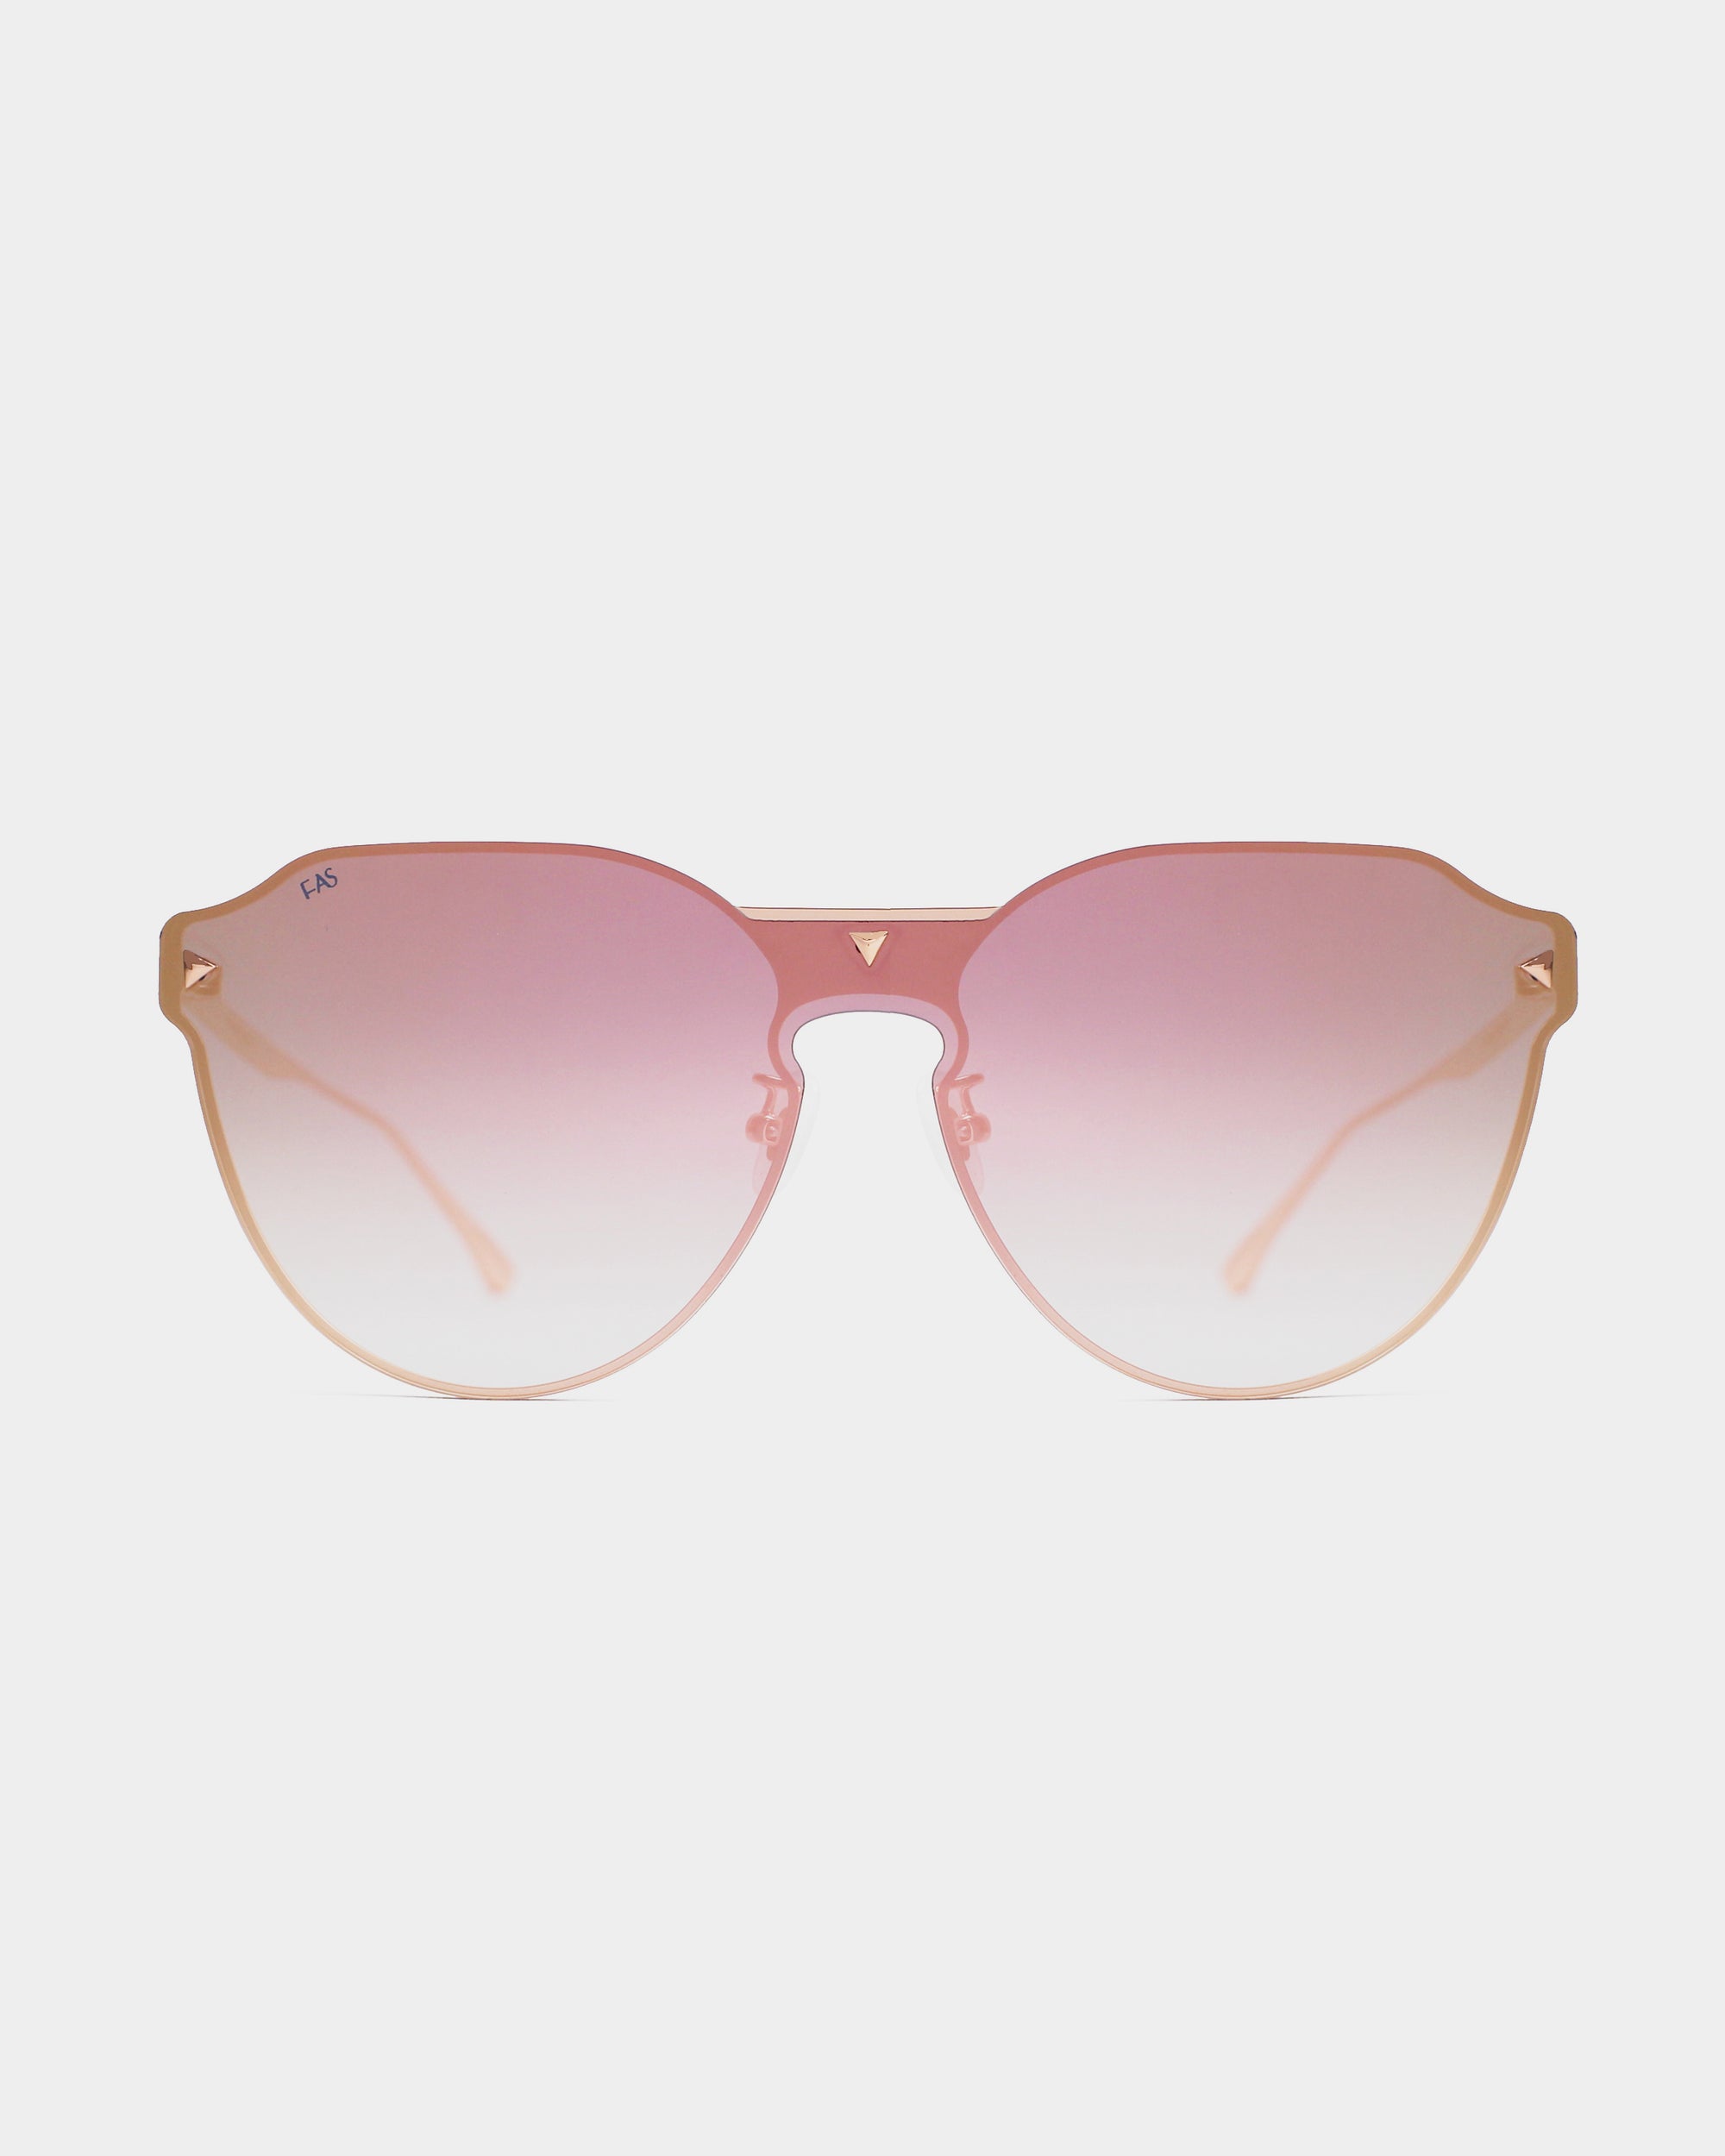 A pair of stylish **Error 404** sunglasses with a light peach frame and round gradient lenses that fade from pink at the top to light pink at the bottom. Featuring 18-karat gold plating, the bridge is subtle, and the arms are thin and elegant, matching the peach color of the frame. These exquisite sunglasses are crafted by **For Art's Sake®**.